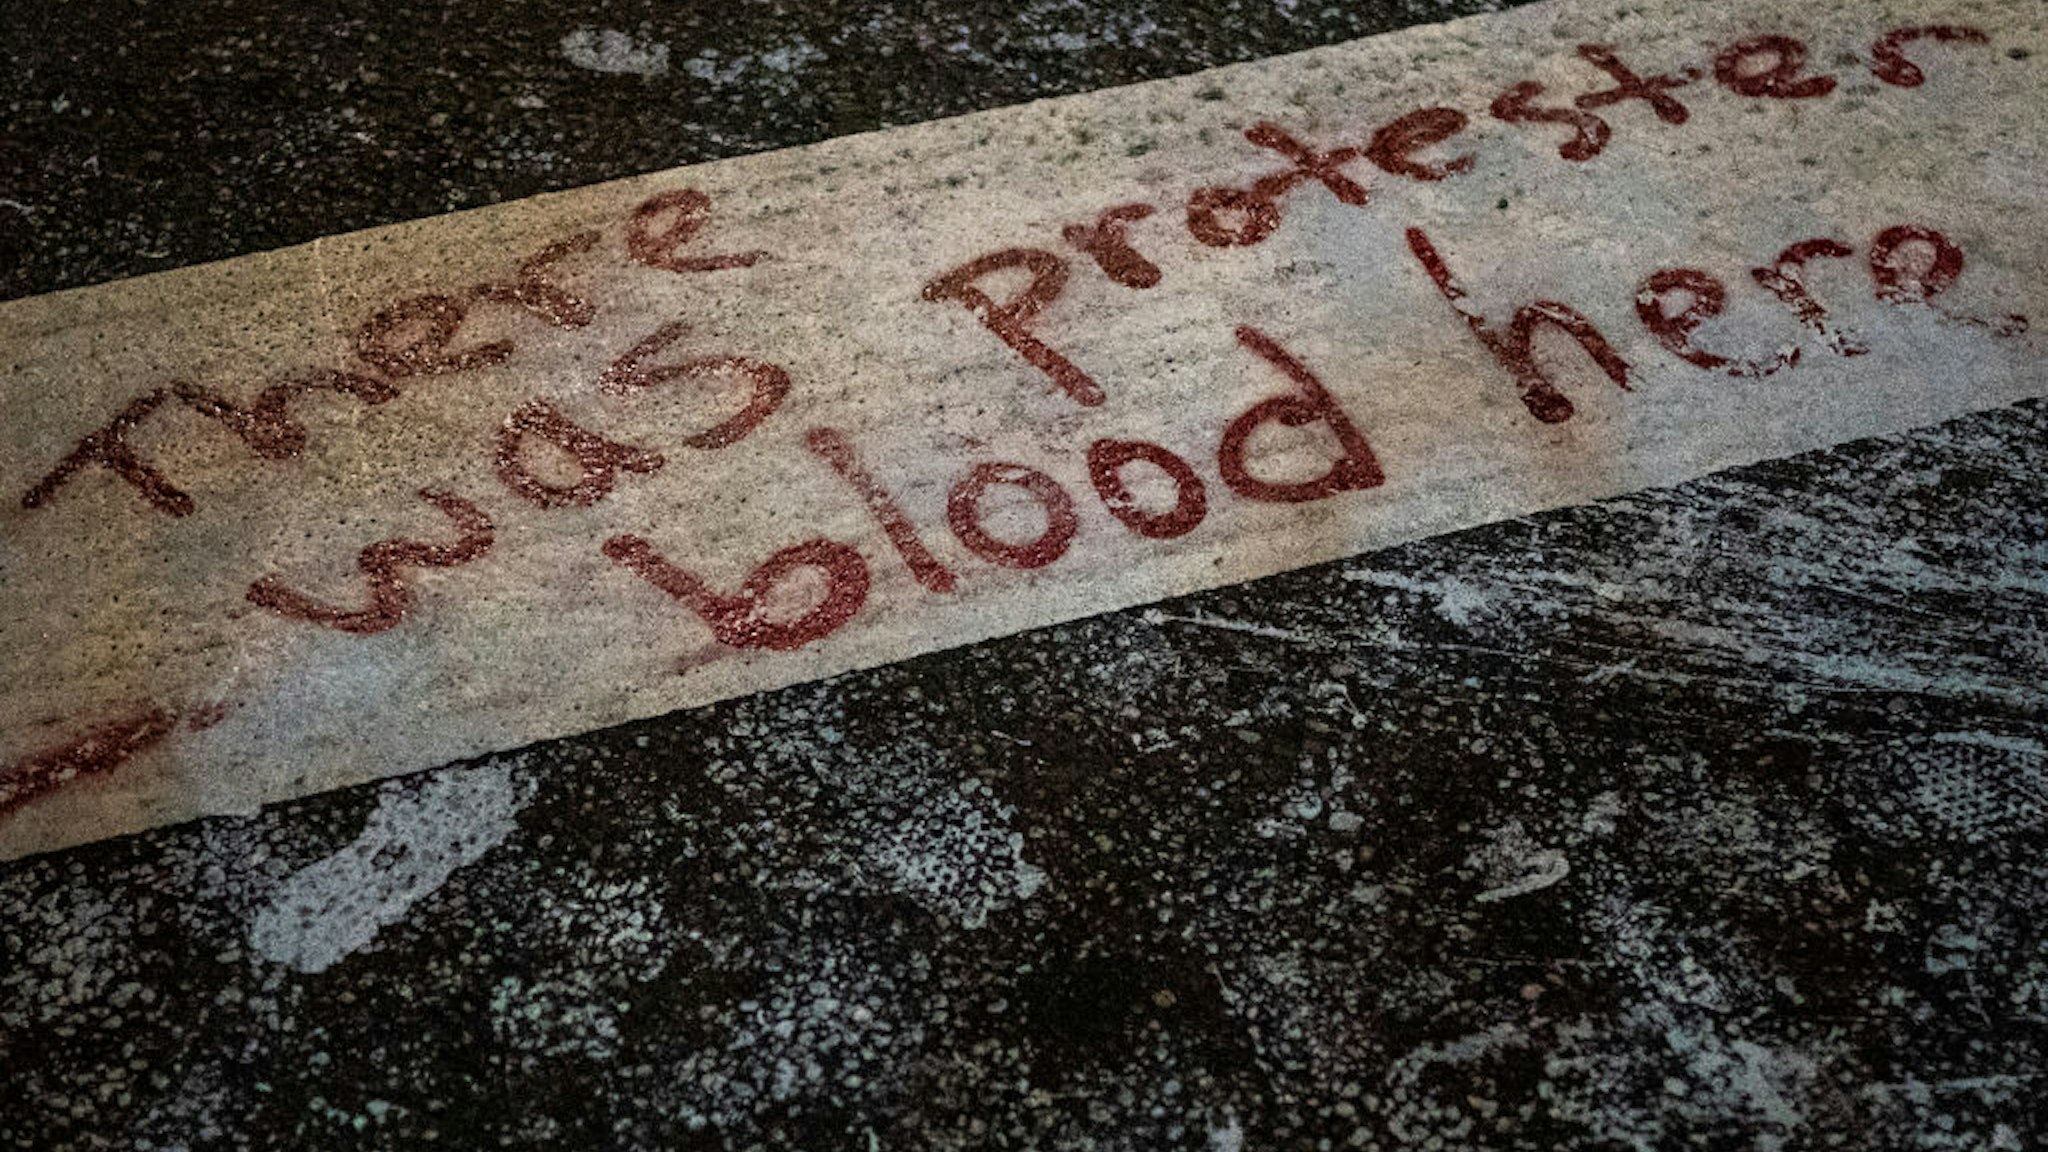 PORTLAND, OR - SEPTEMBER 5: The words There was protester blood here are seen here in a crosswalk after Portland police injured a woman during an arrest early in the morning on September 5, 2020 in Portland, Oregon. Friday night marked the 99th night of protests in Portland following the death of George Floyd in police custody. (Photo by Nathan Howard/Getty Images)